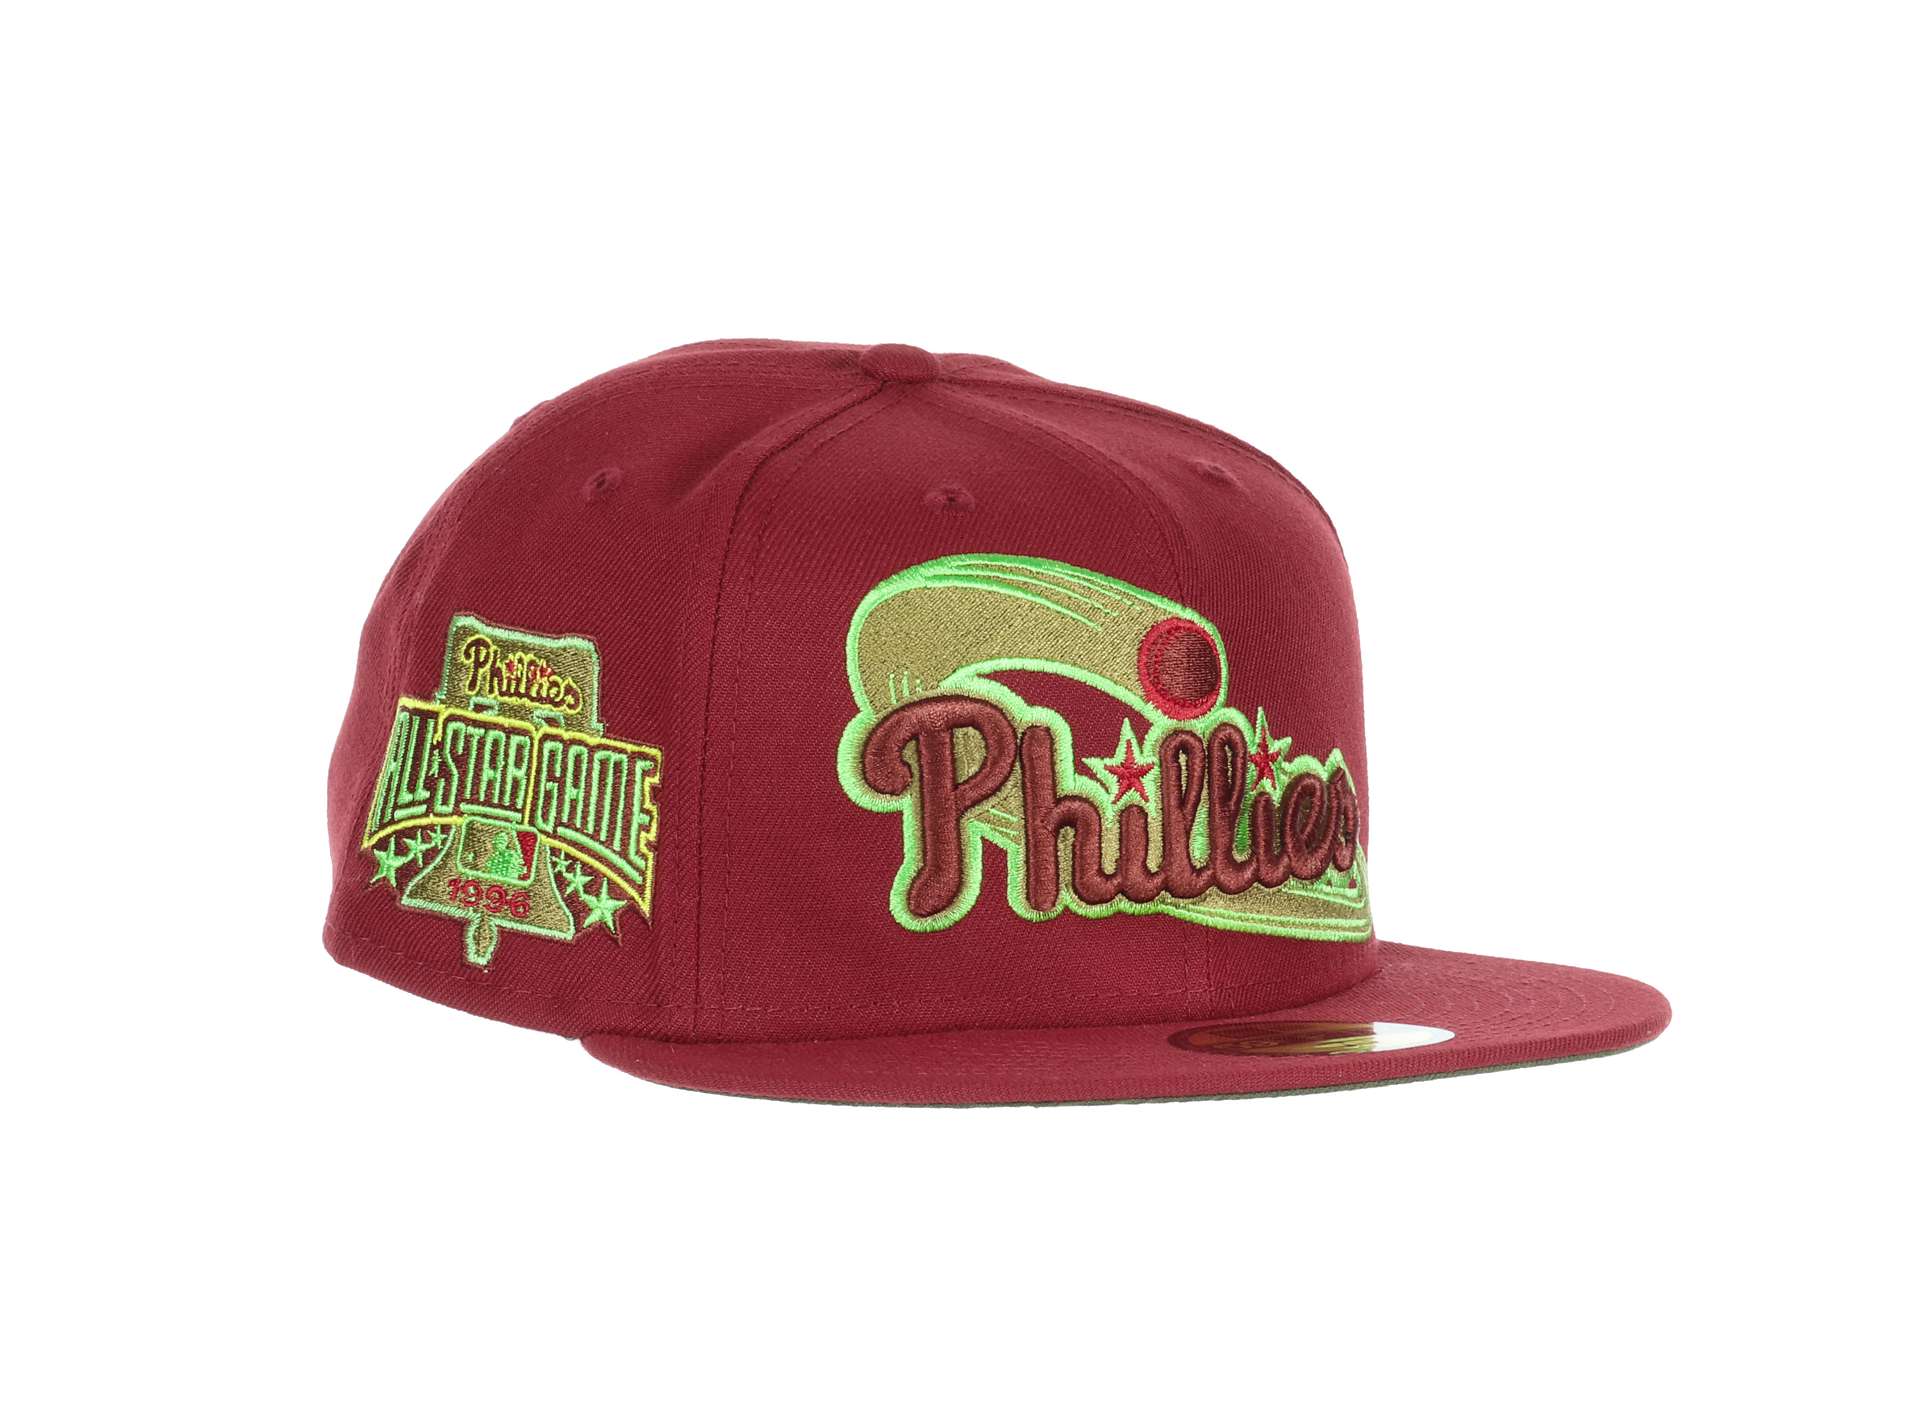 Philadelphia Phillies MLB Cooperstown All-Star Game 1996 Sidepatch Red 59Fifty Basecap New Era